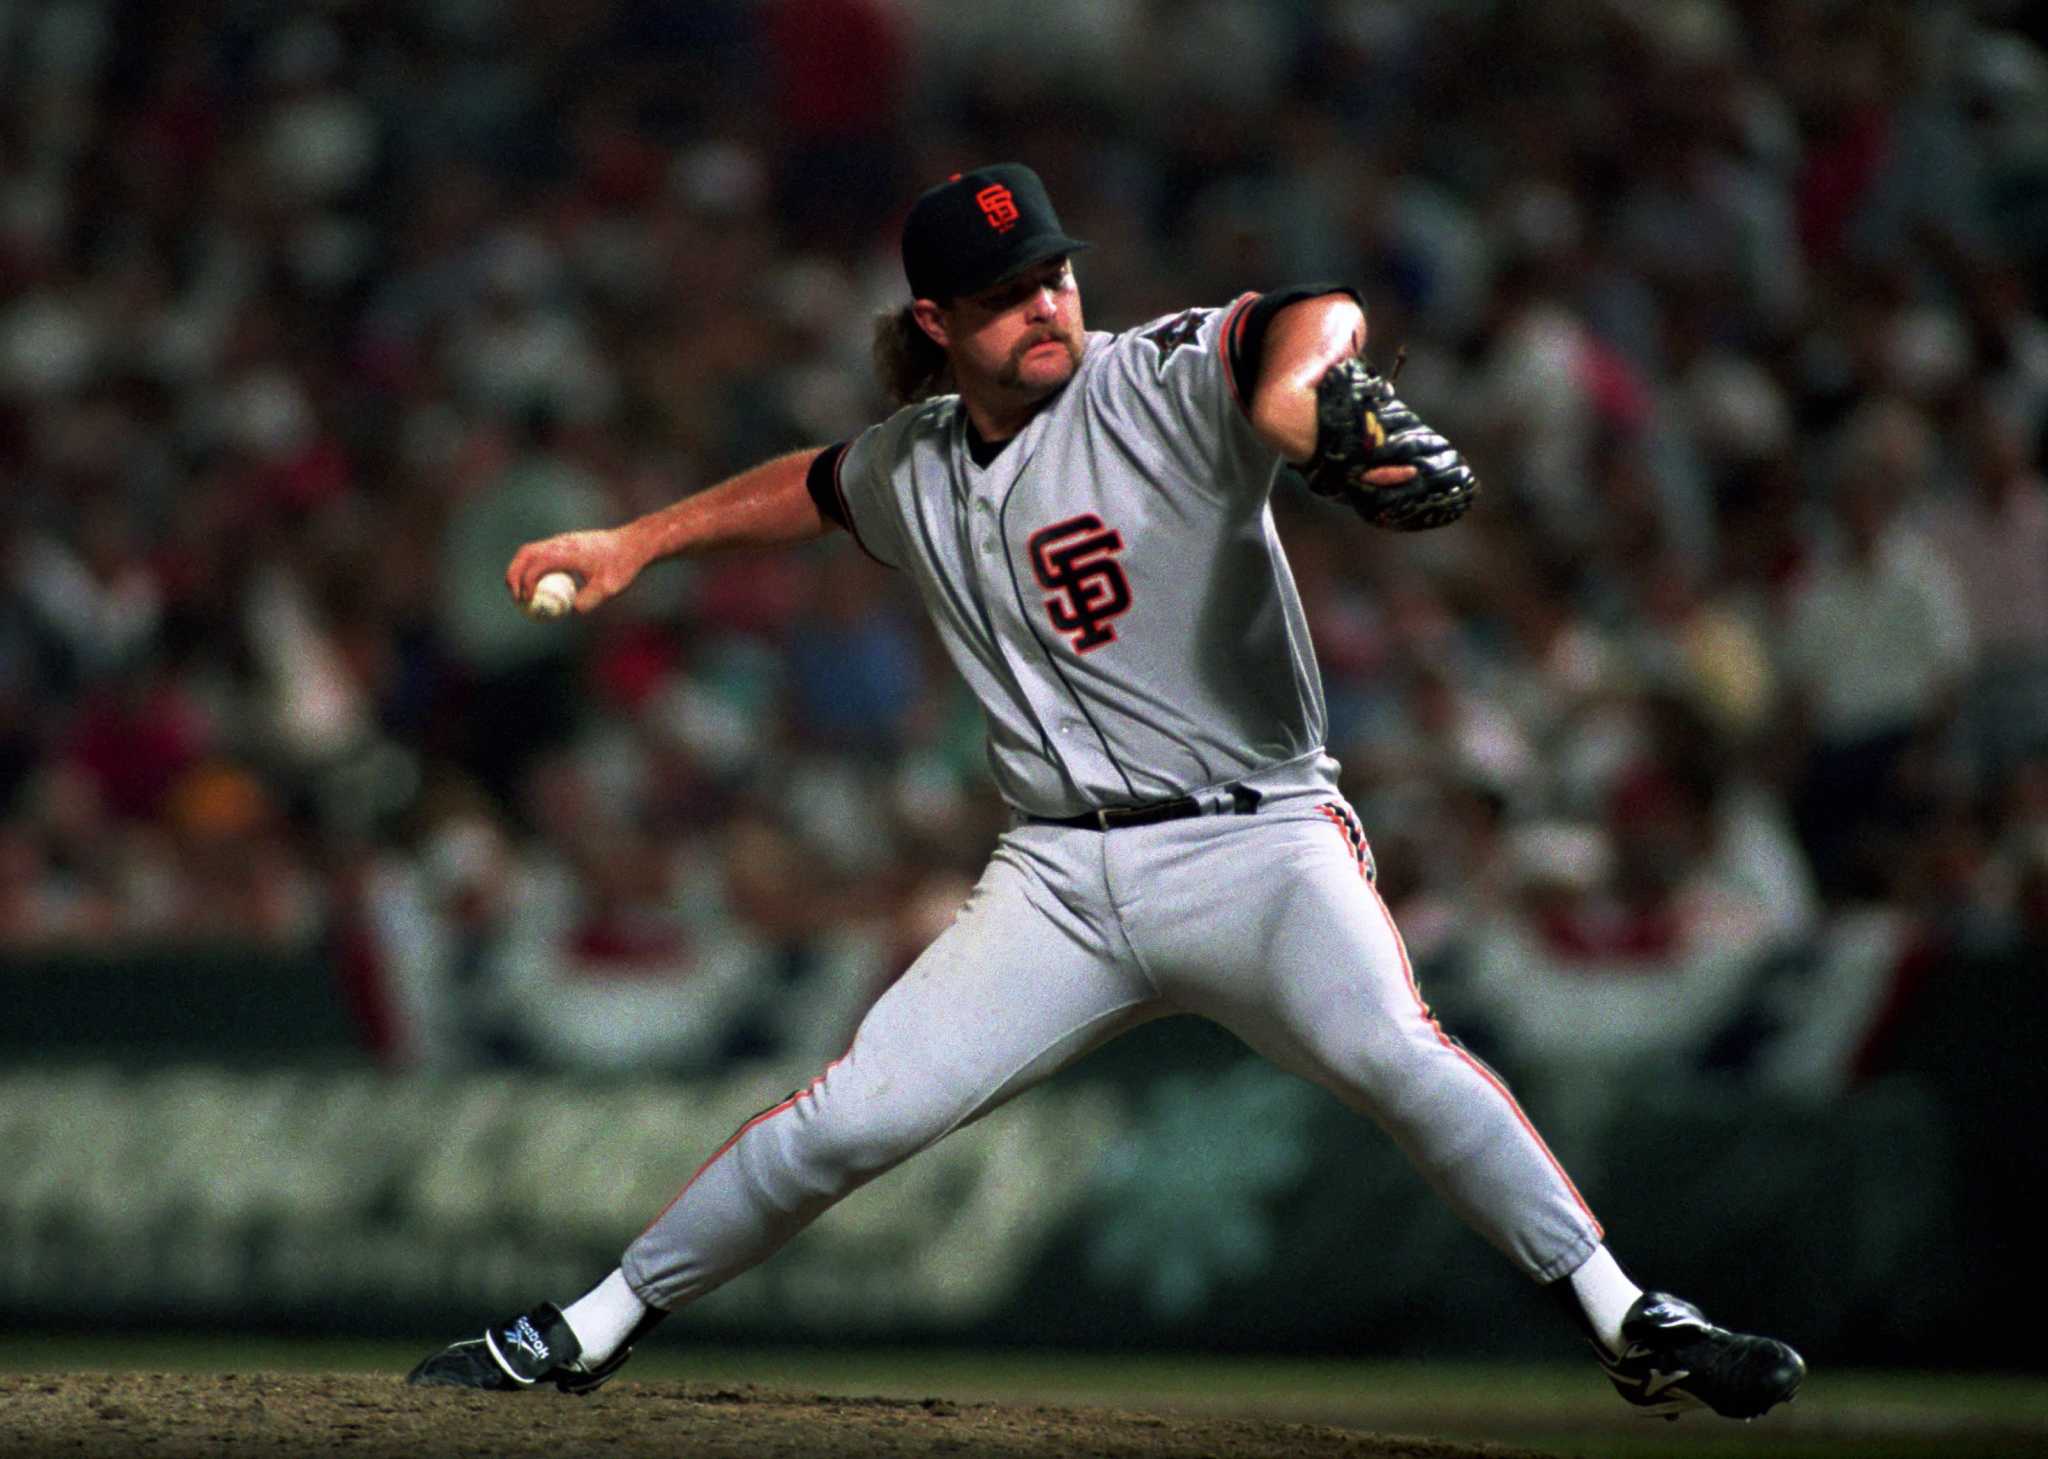 Ranking the best and worst SF Giants uniforms through the years